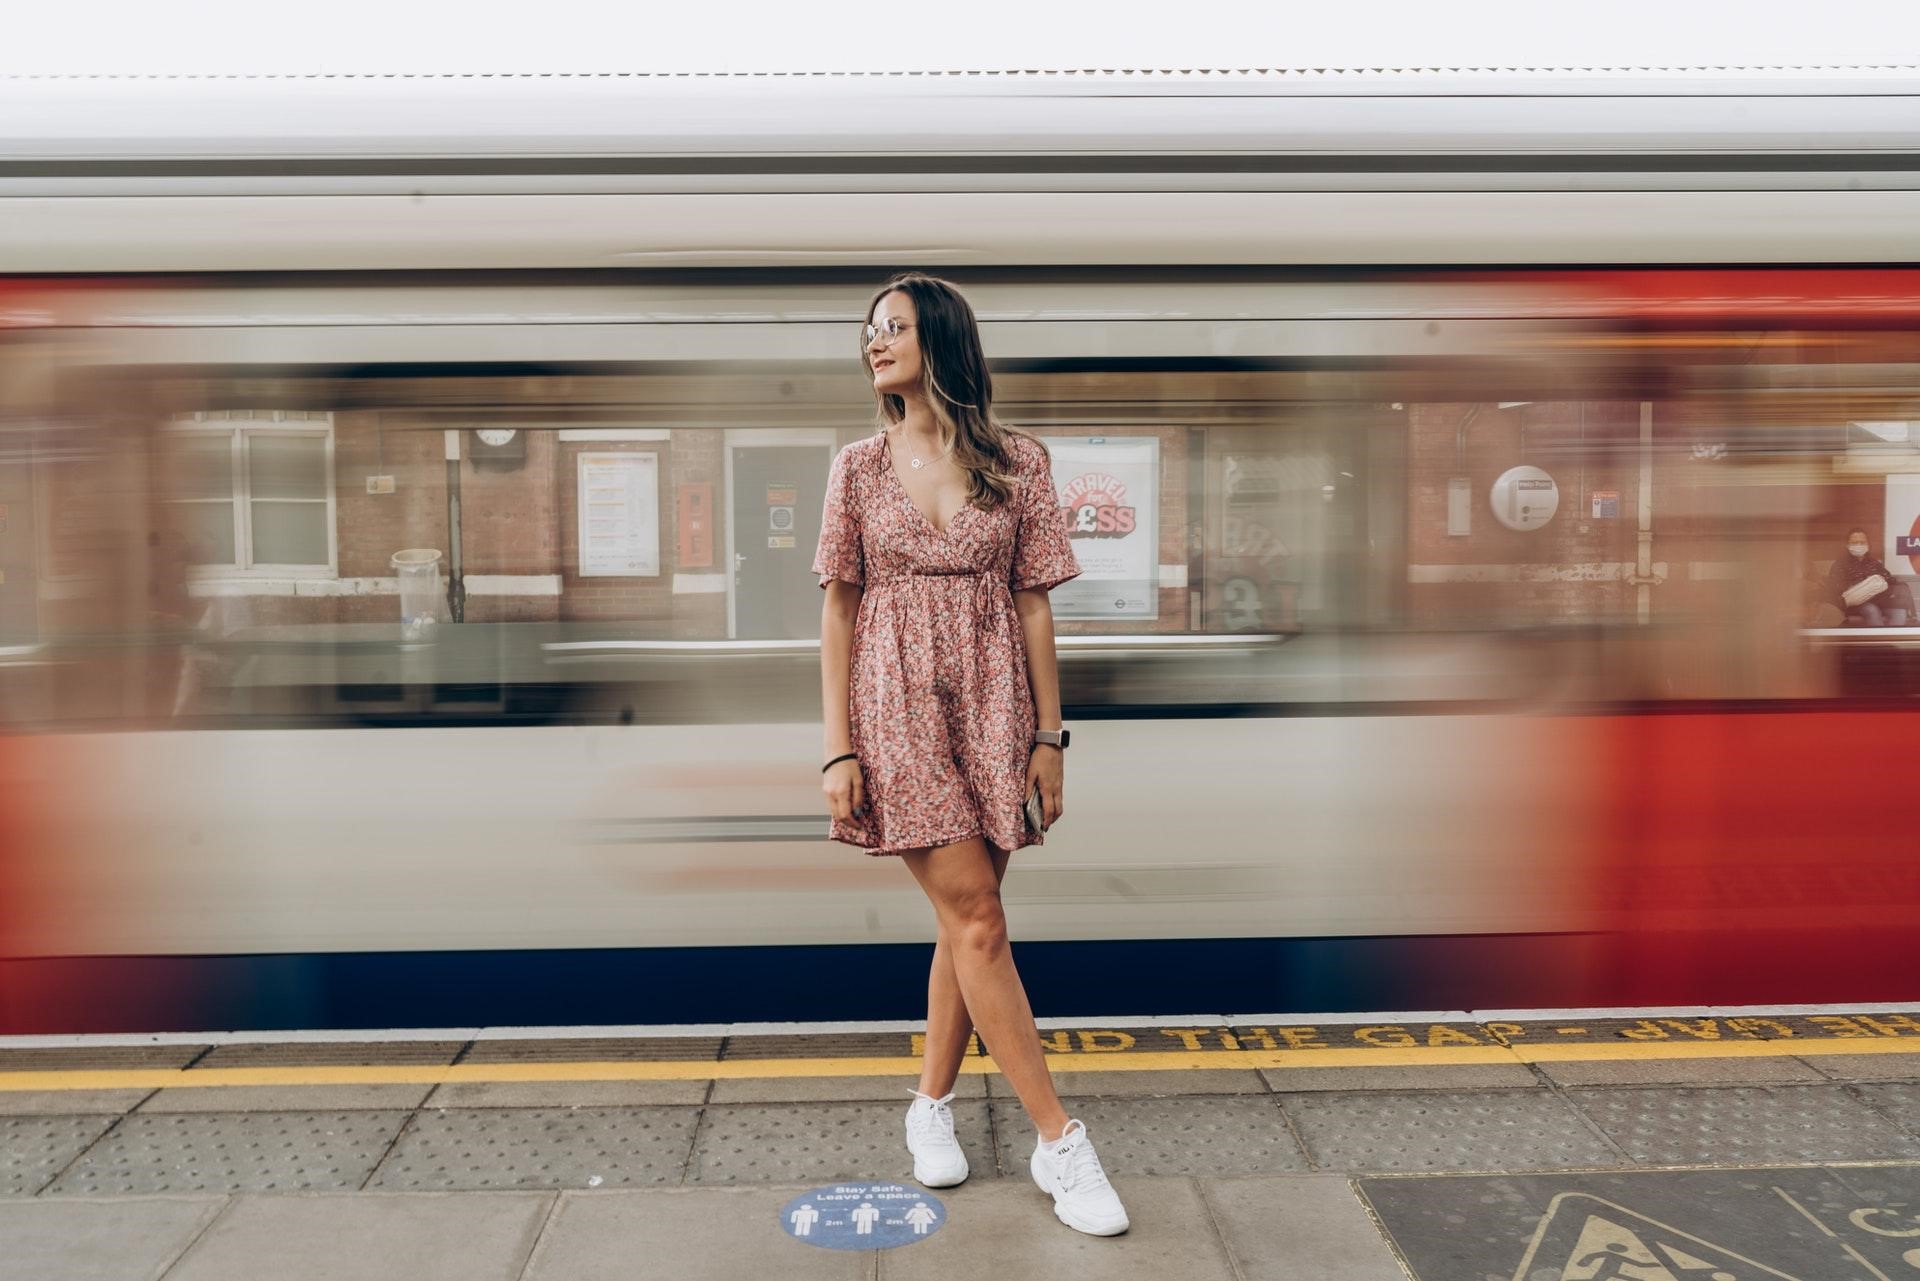 Woman standing in front of a train